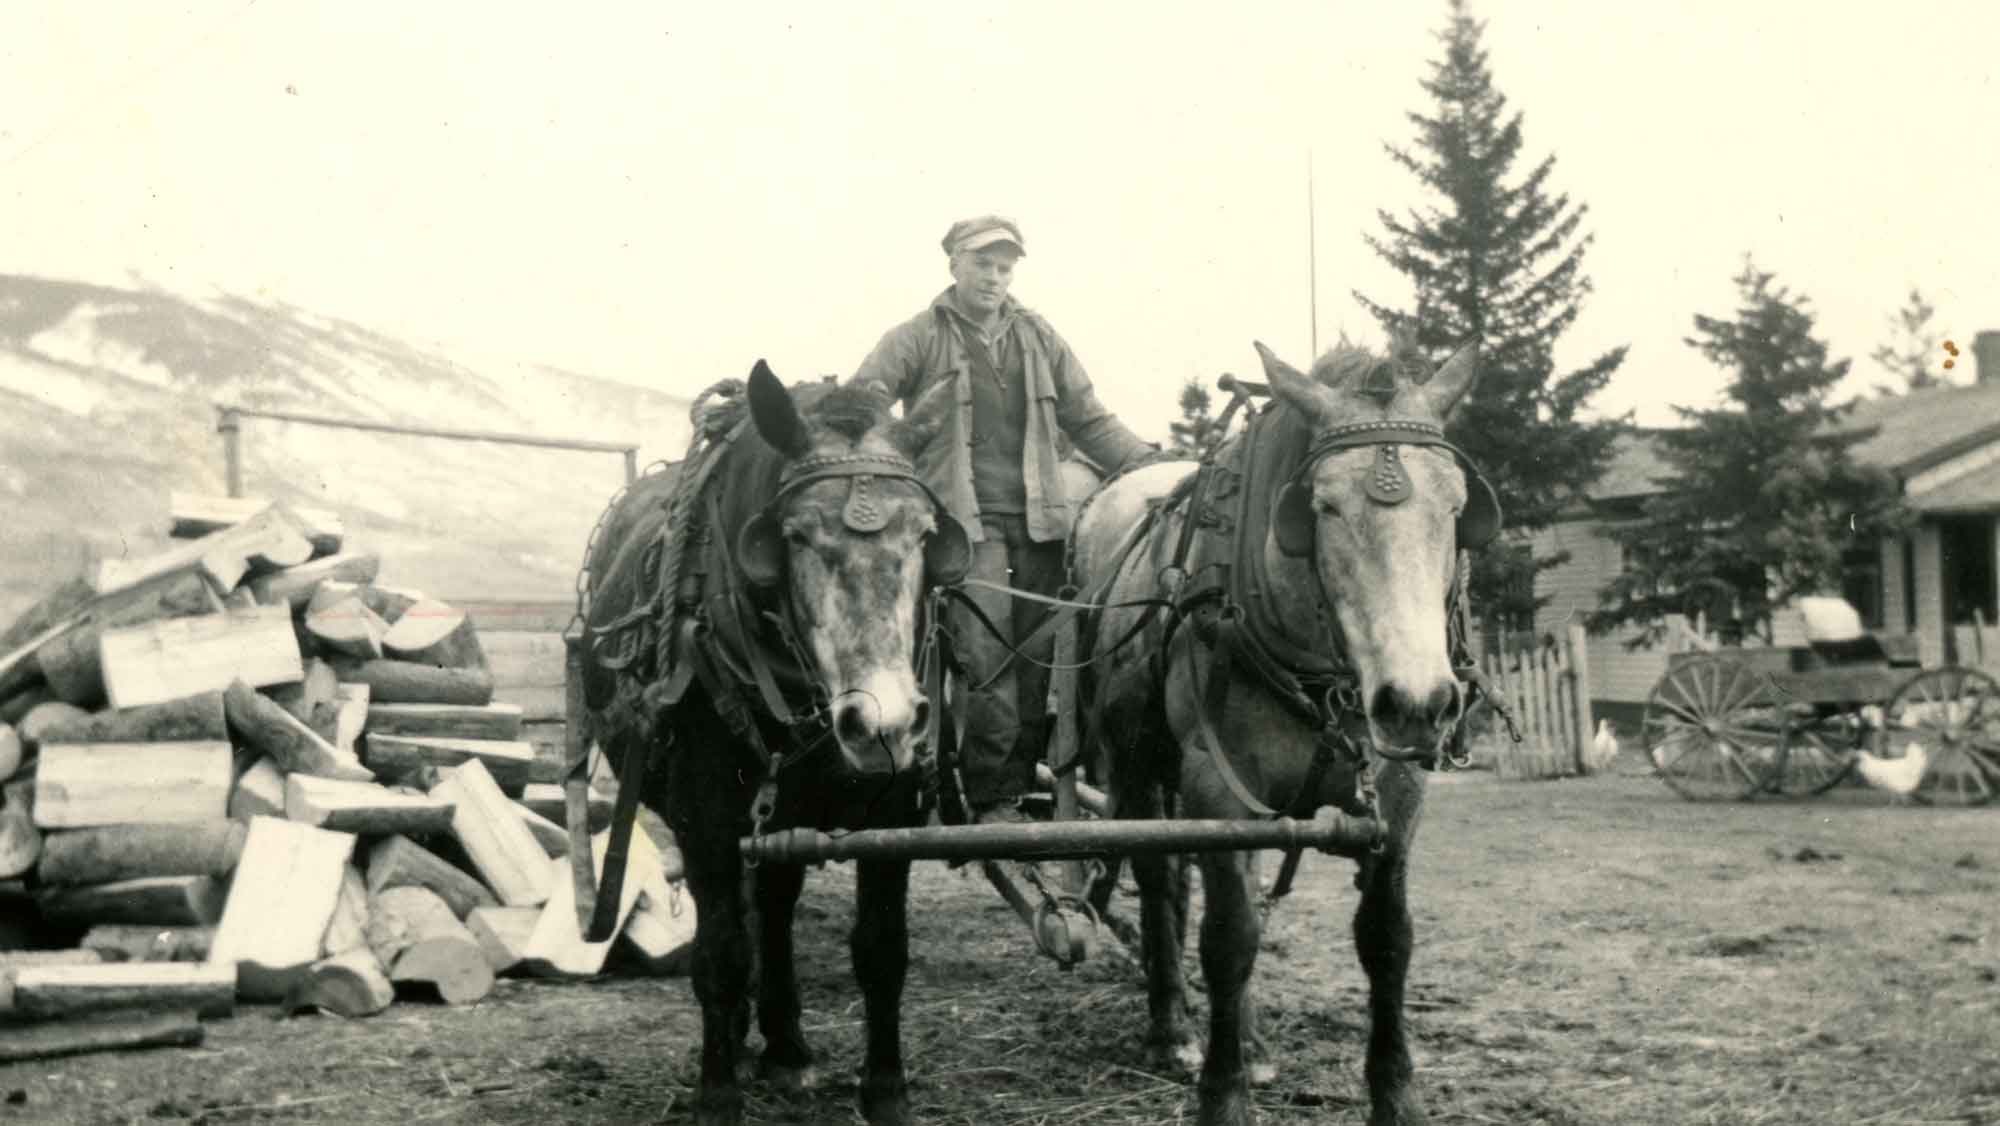 Doug Taggart with Horses. Date unknown.